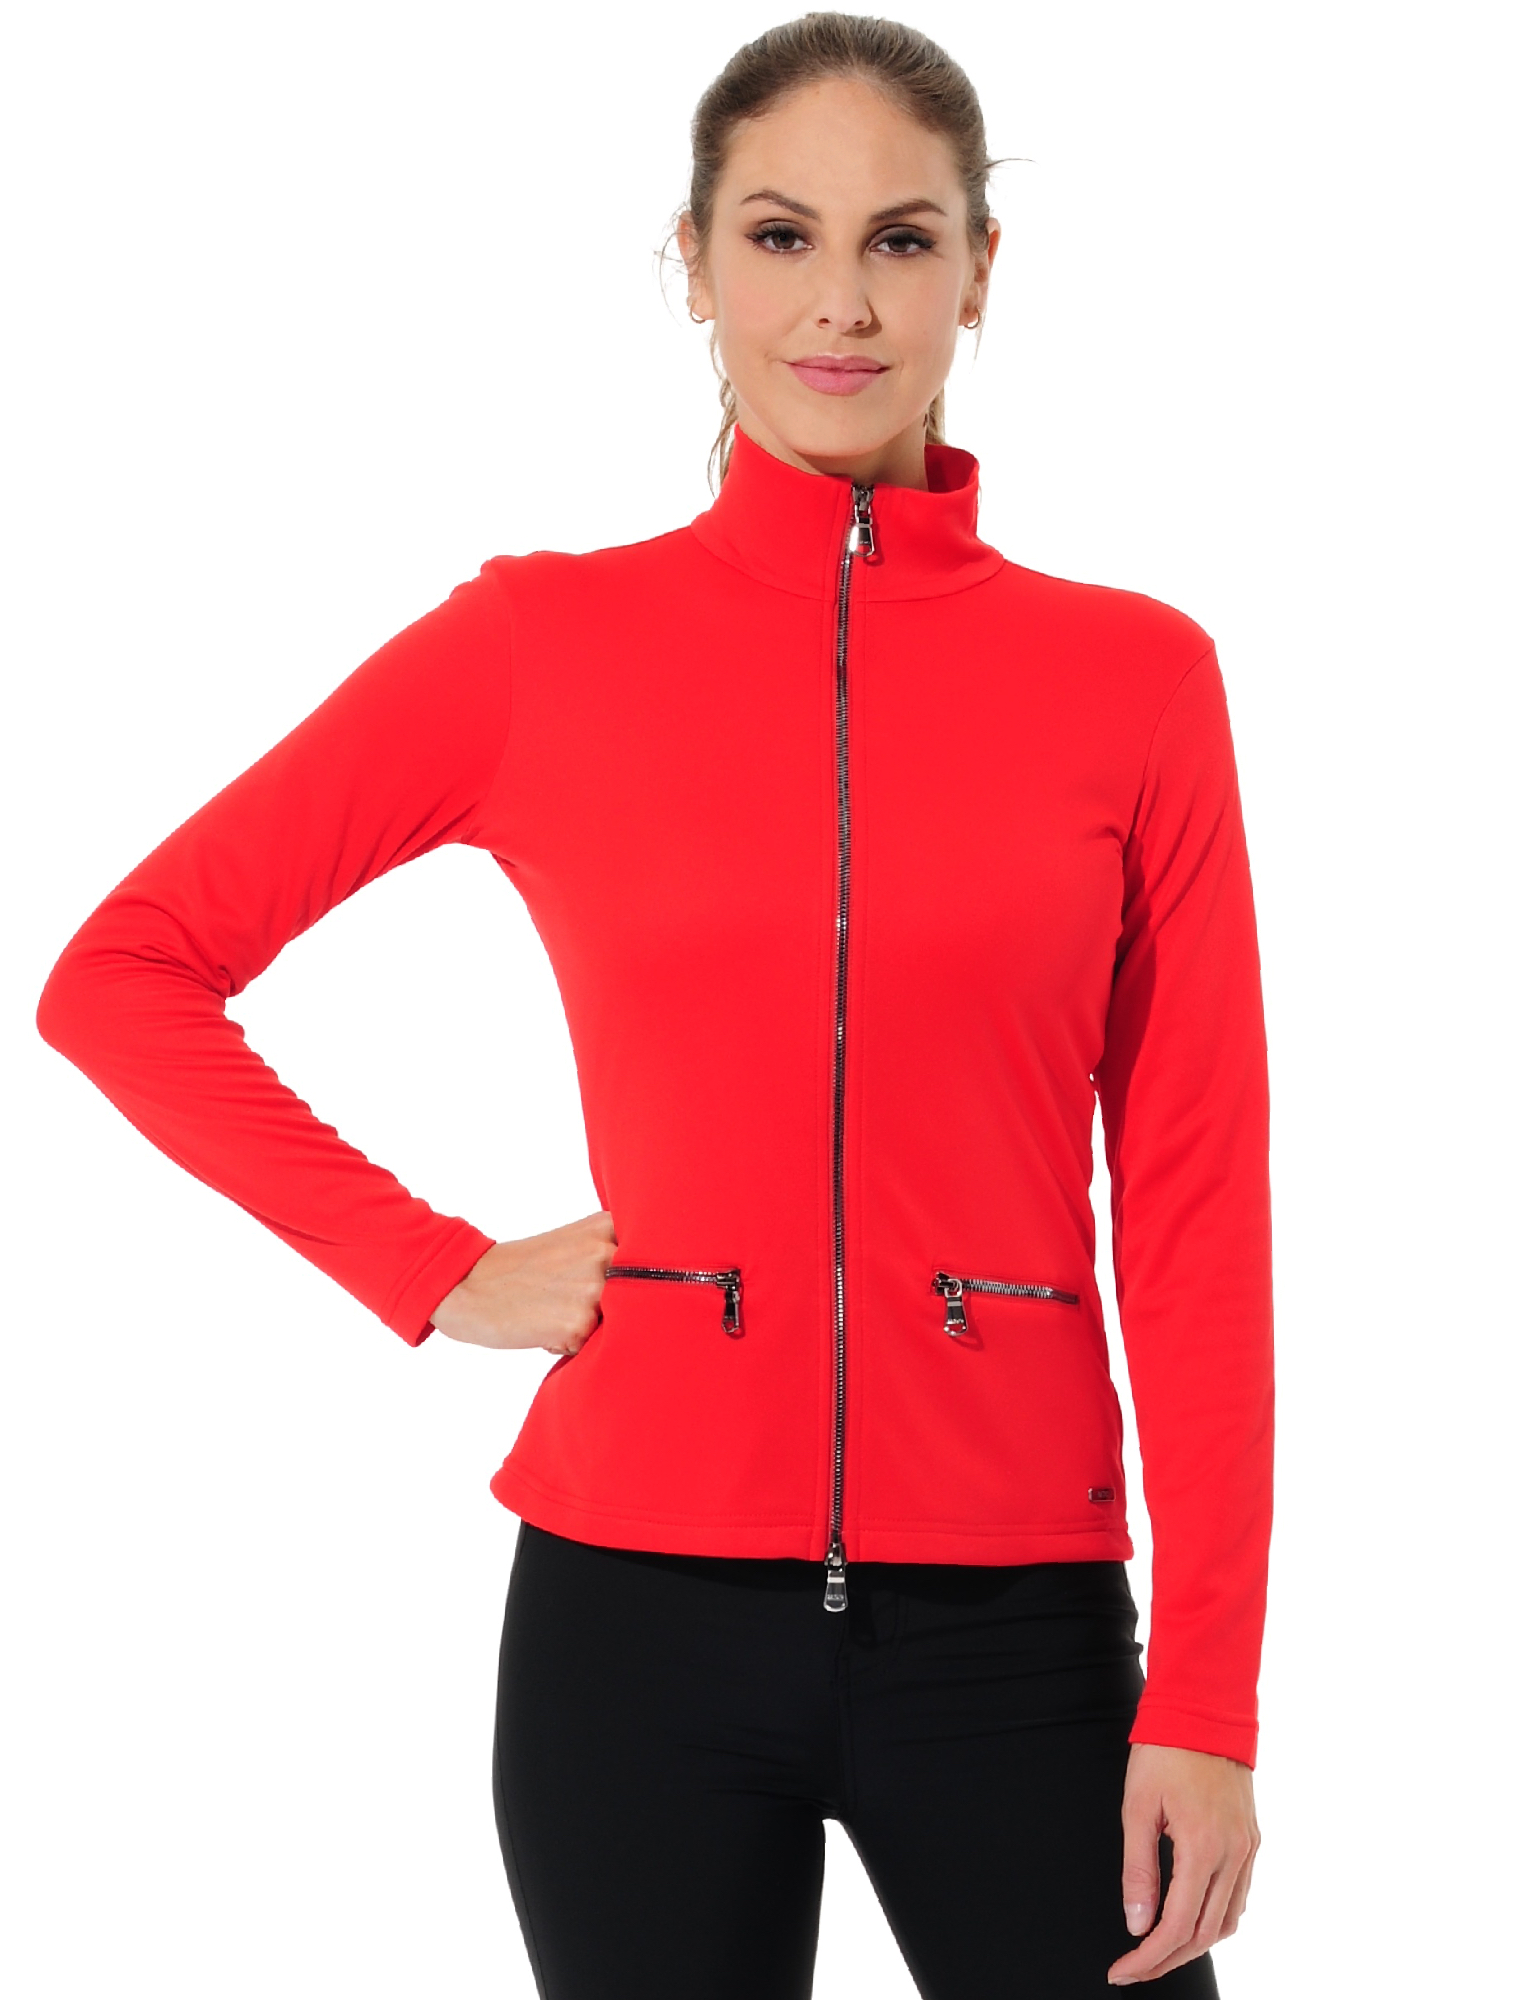 Softex Jacket red